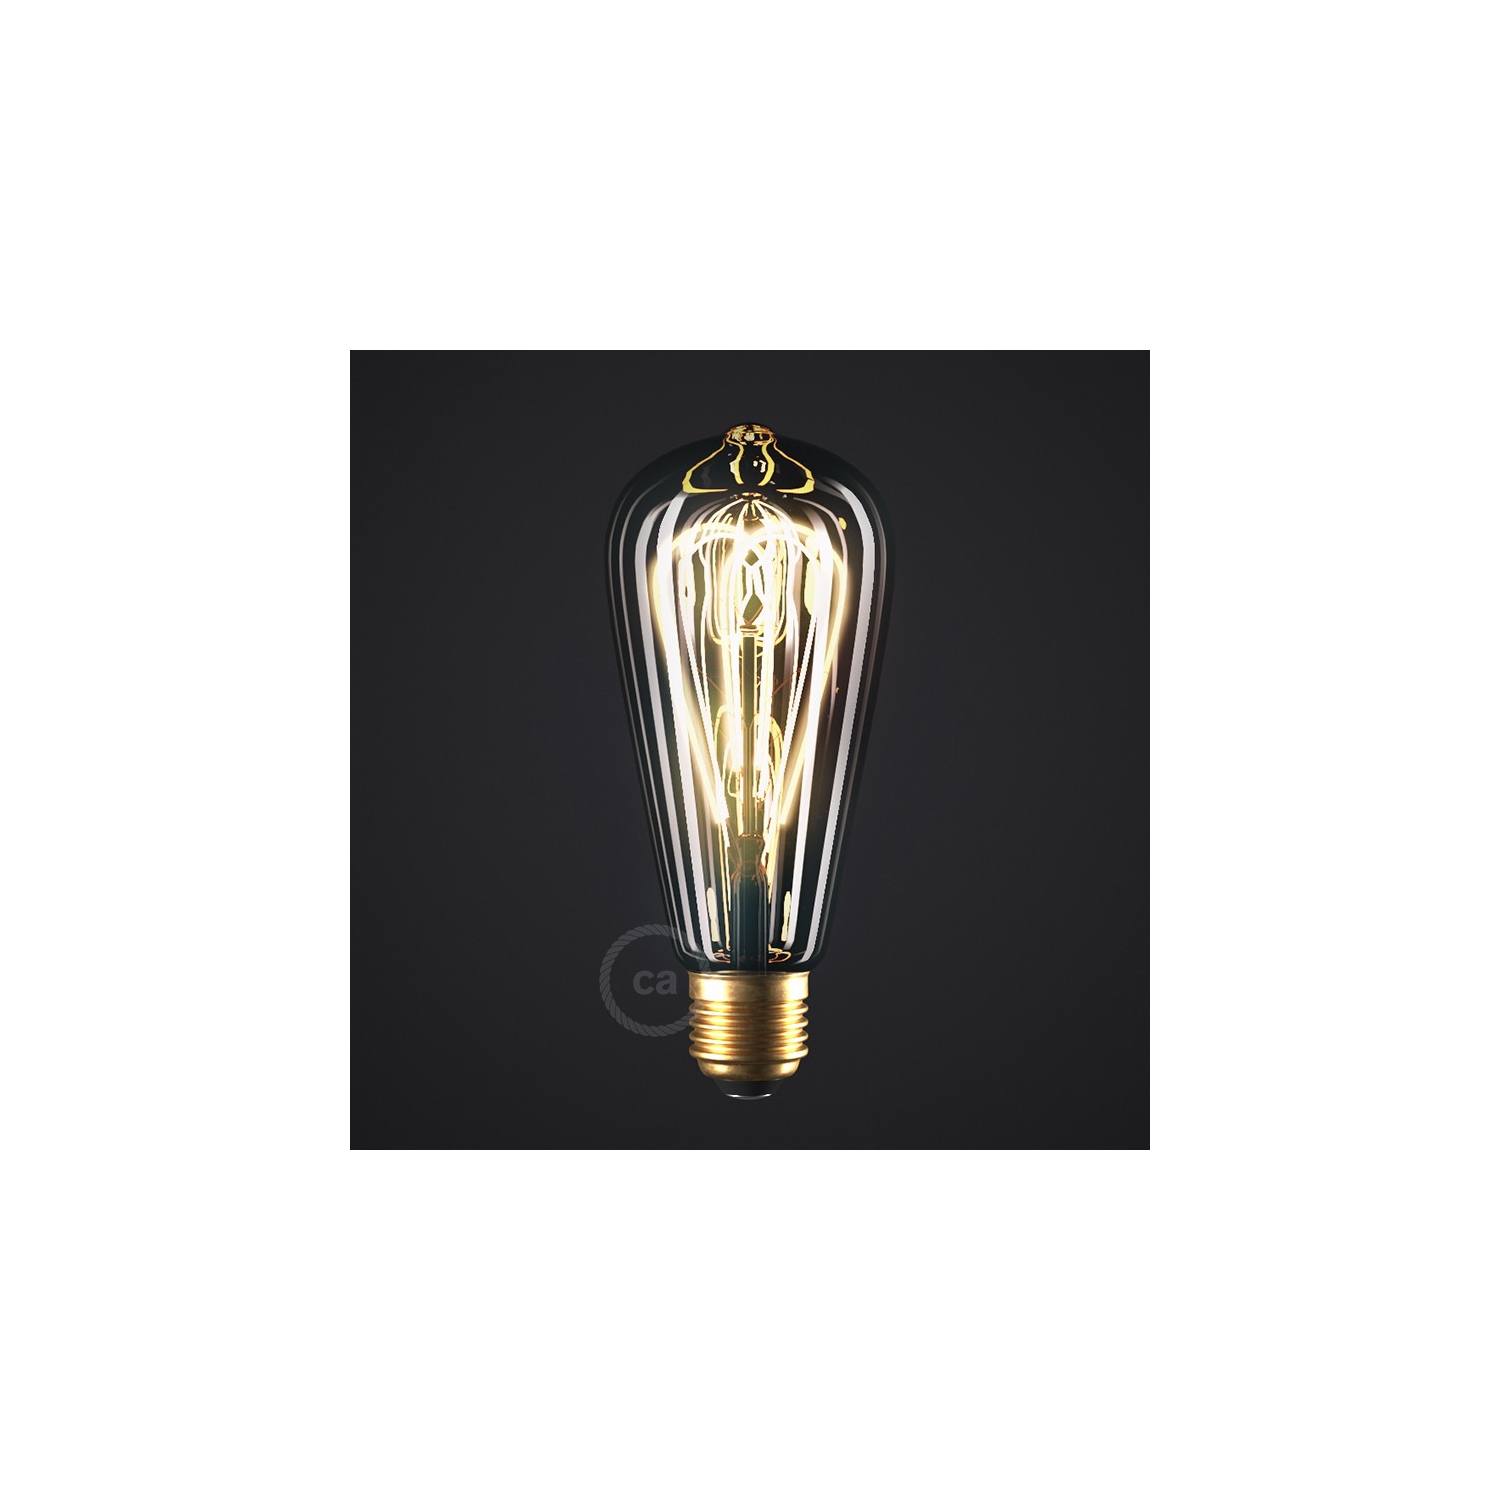 LED Smoky Light Bulb - Edison ST64 Curved Double Loop Filament - 5W E27 Dimmable 2000K